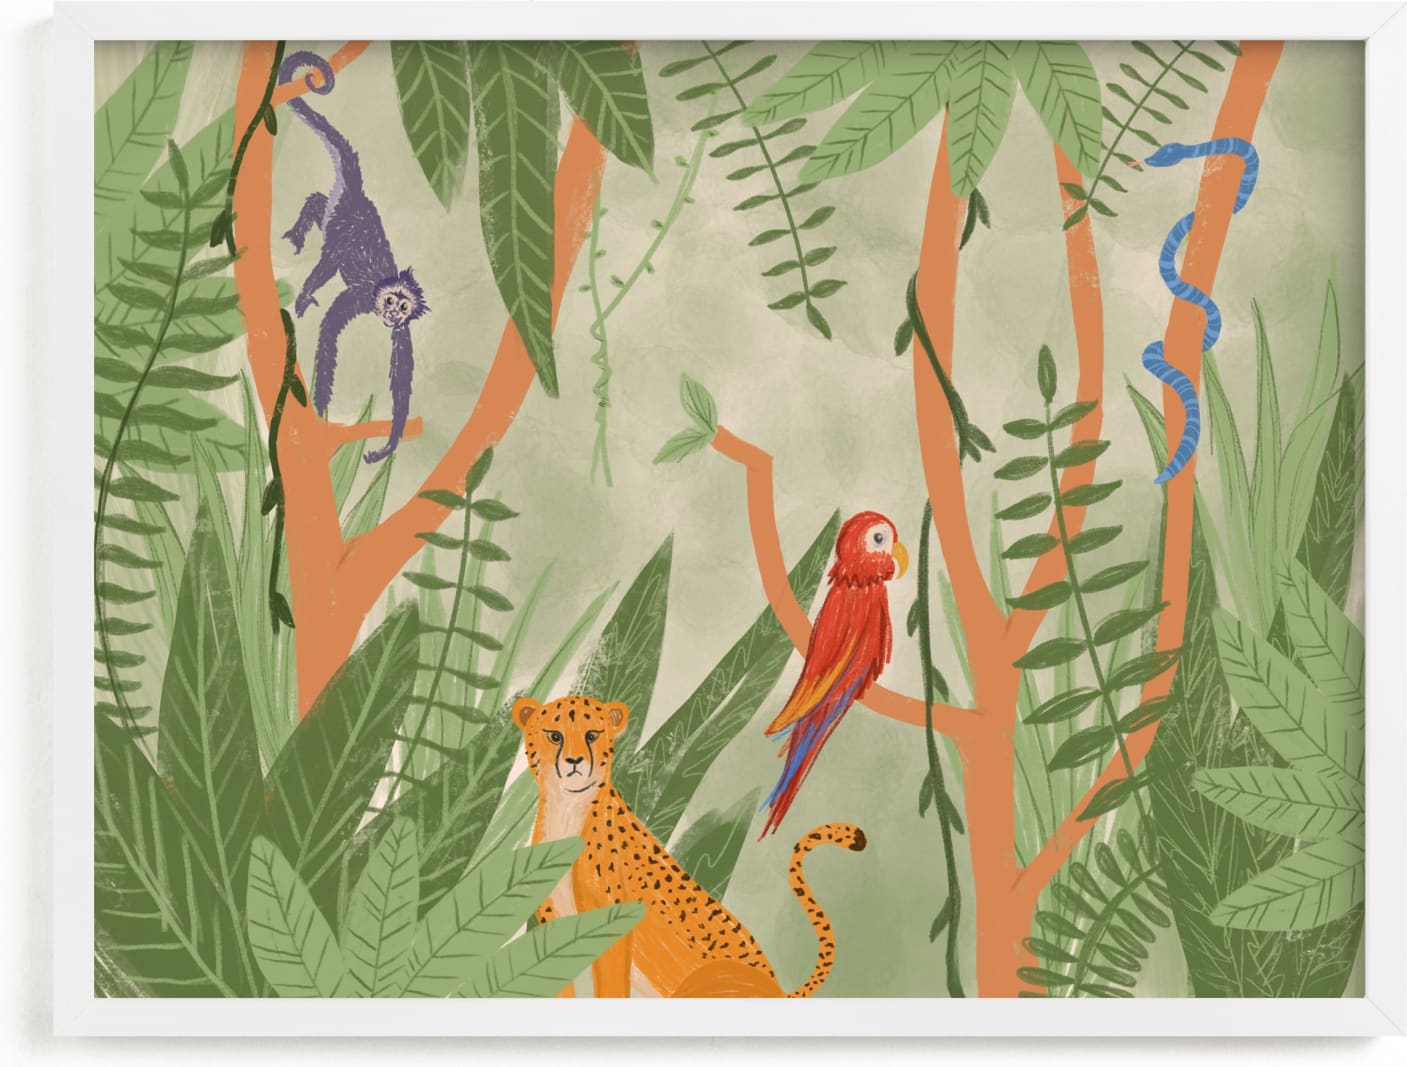 This is a colorful kids wall art by Stevee Gomez called Jungle Fun.